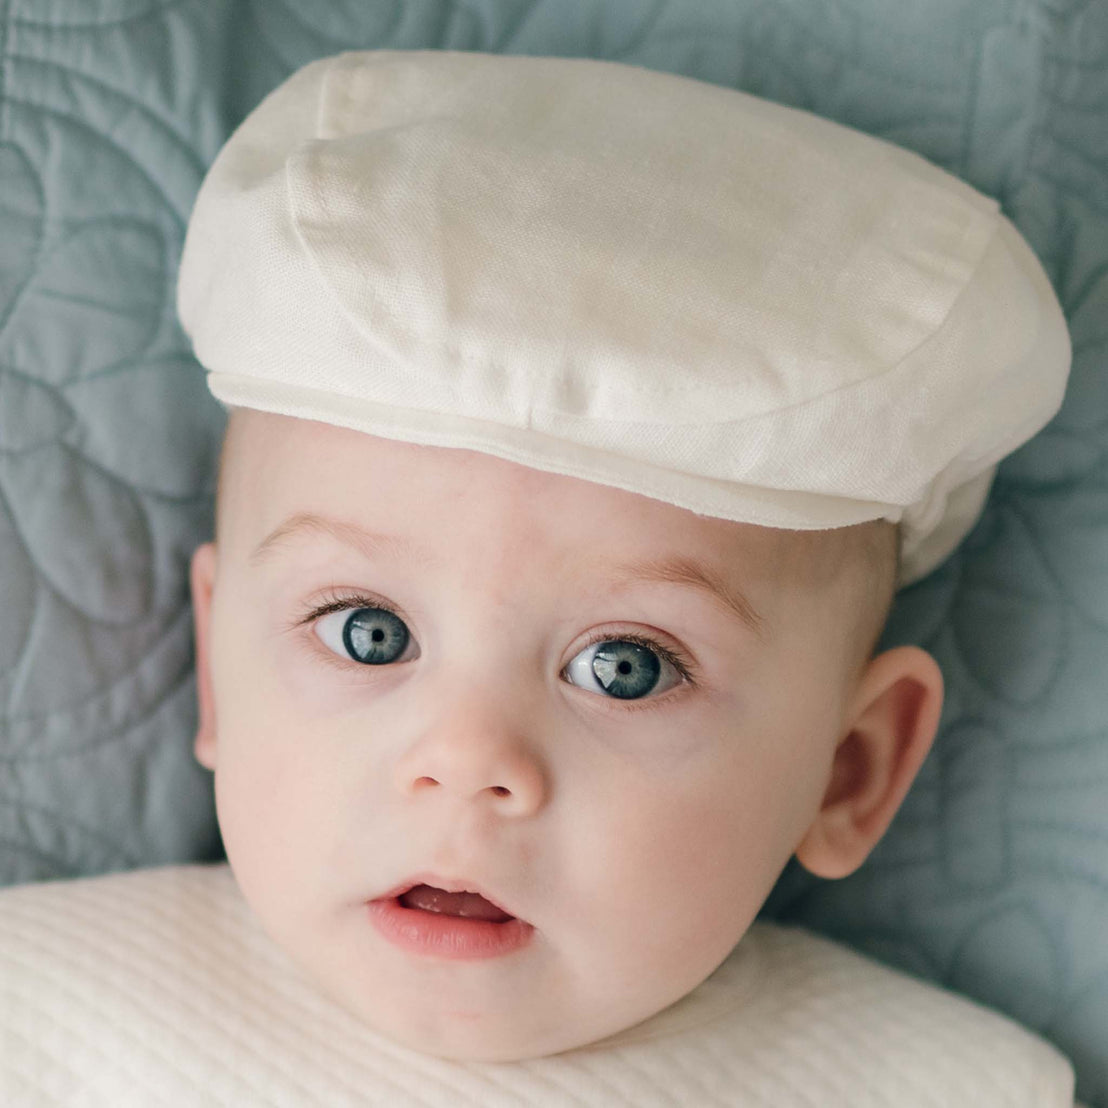 A baby with big blue eyes is wearing a handmade white christening outfit and looking at the camera. The baby, topped with an adorable Oliver Linen Newsboy Cap, is laying against a light gray quilted background.